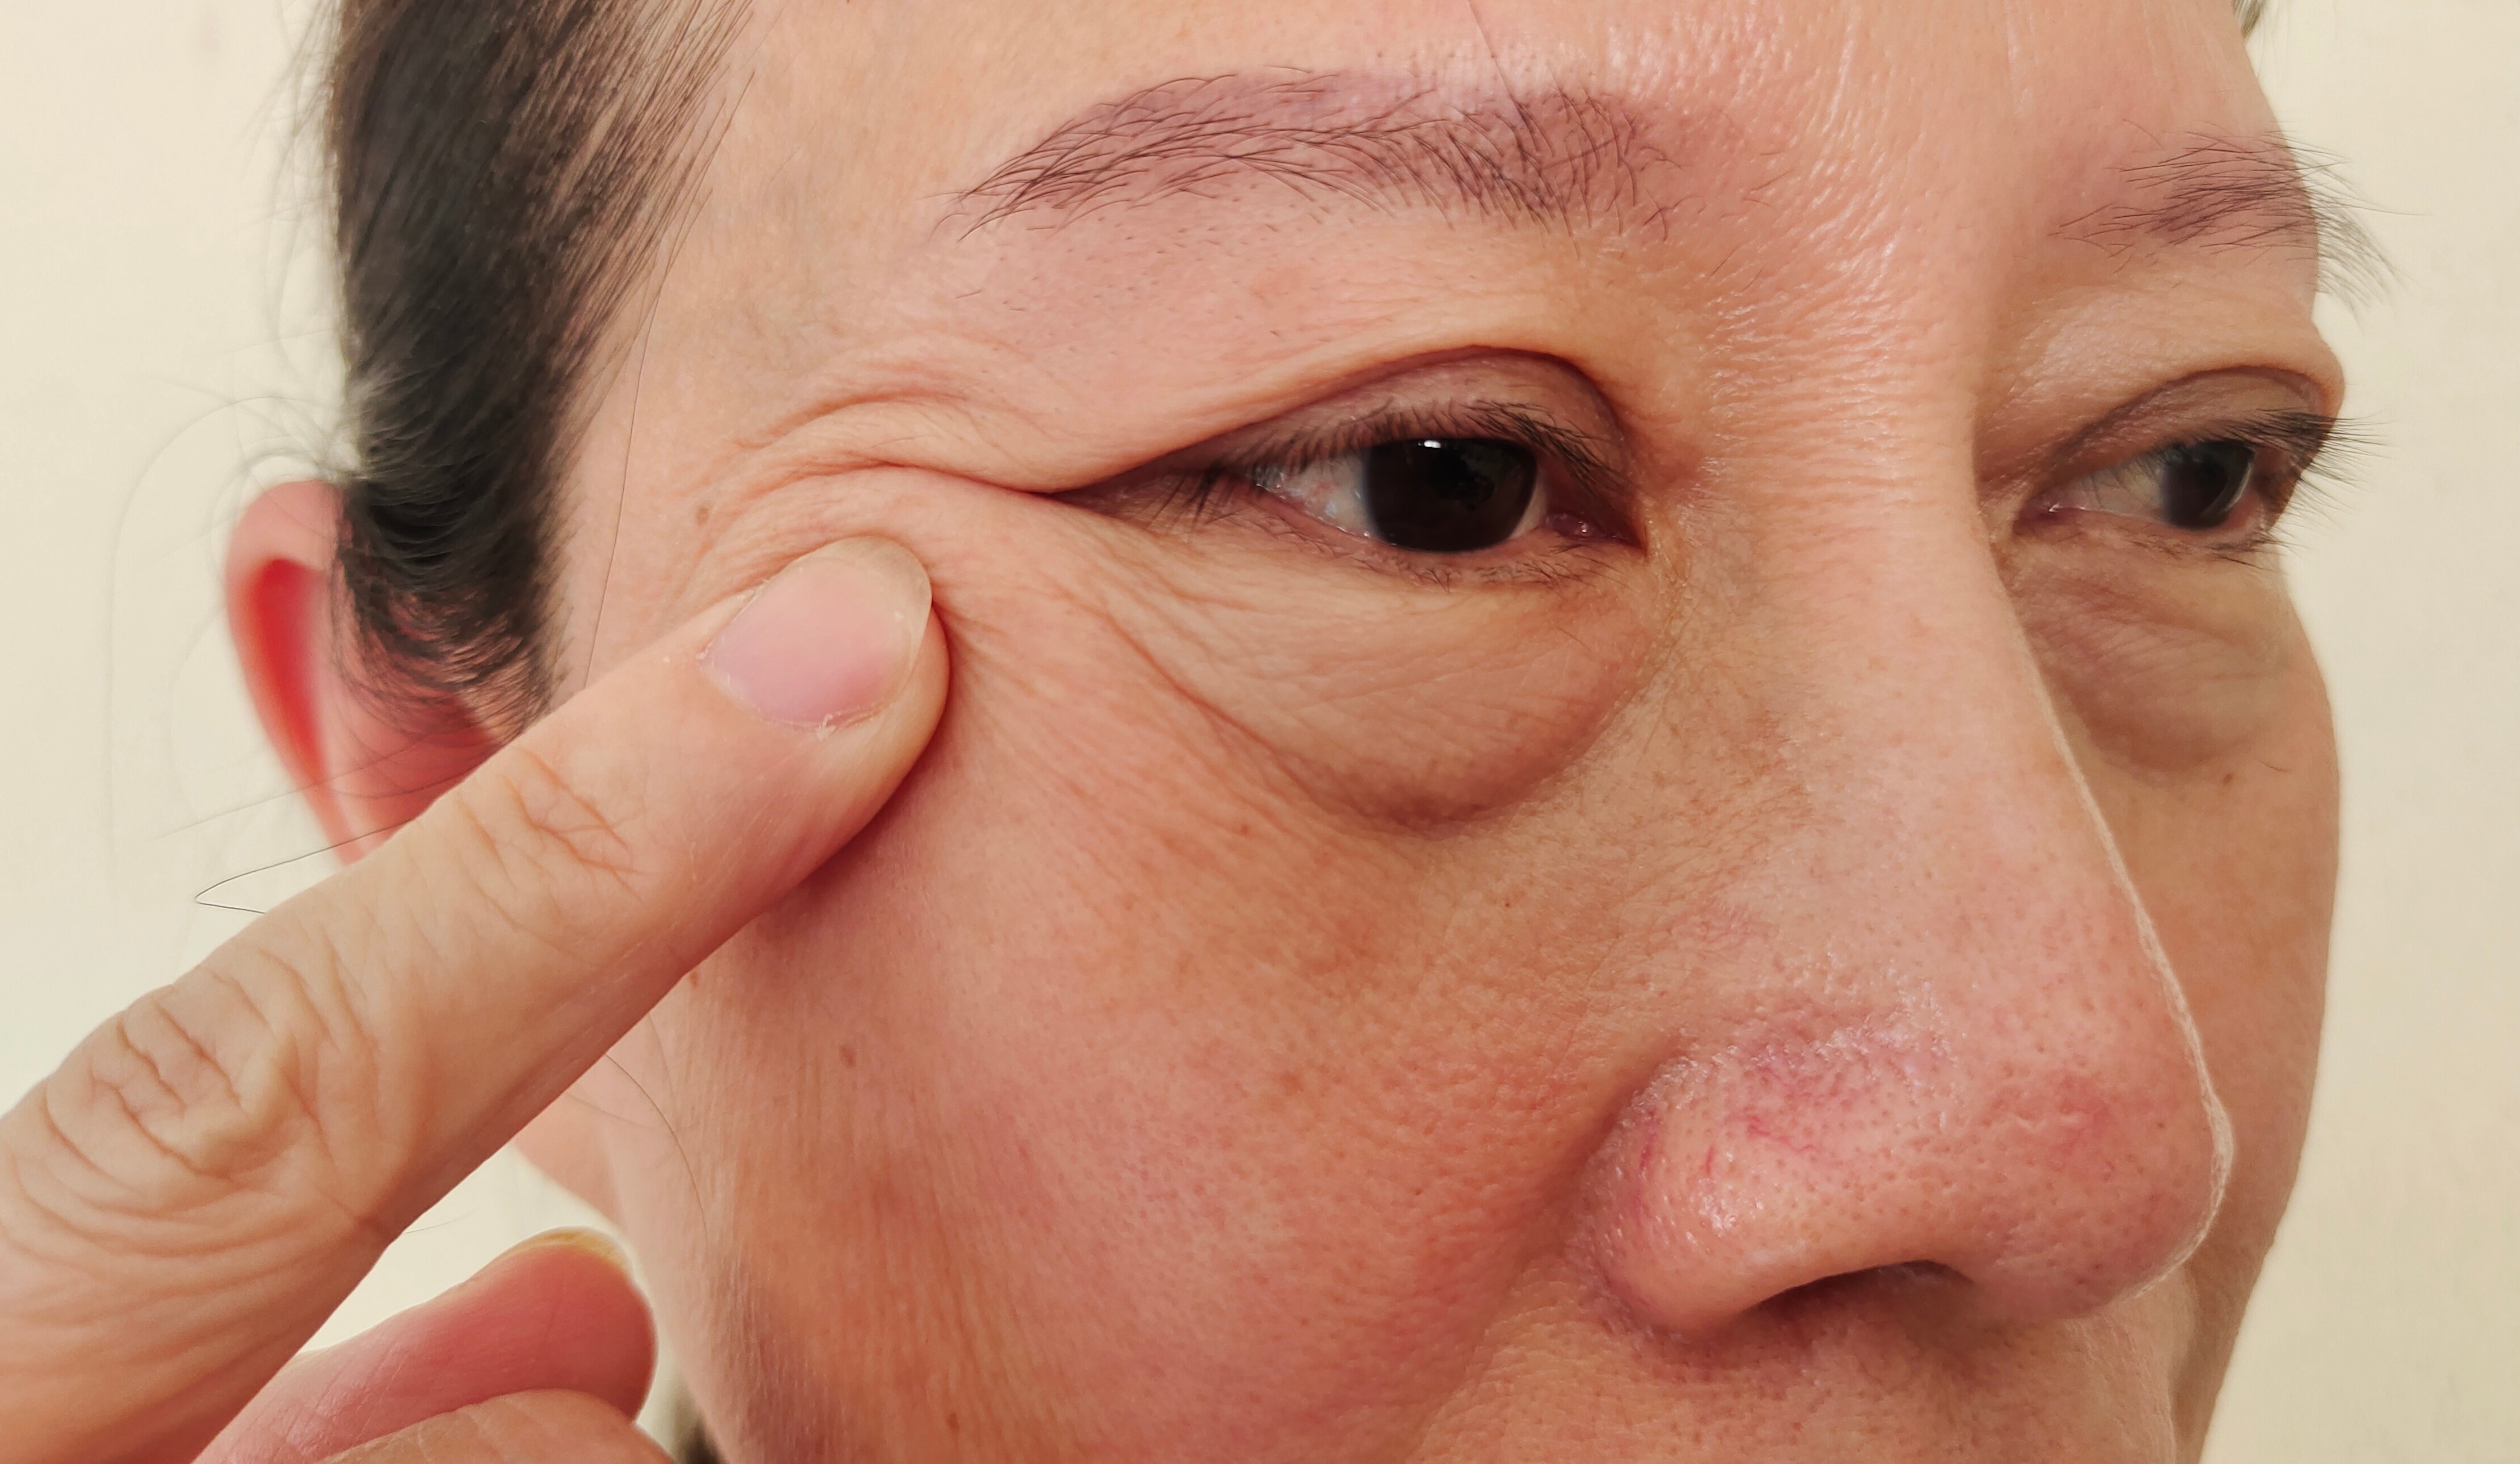 What Really Causes Puffy Eyes and Eye Bags?